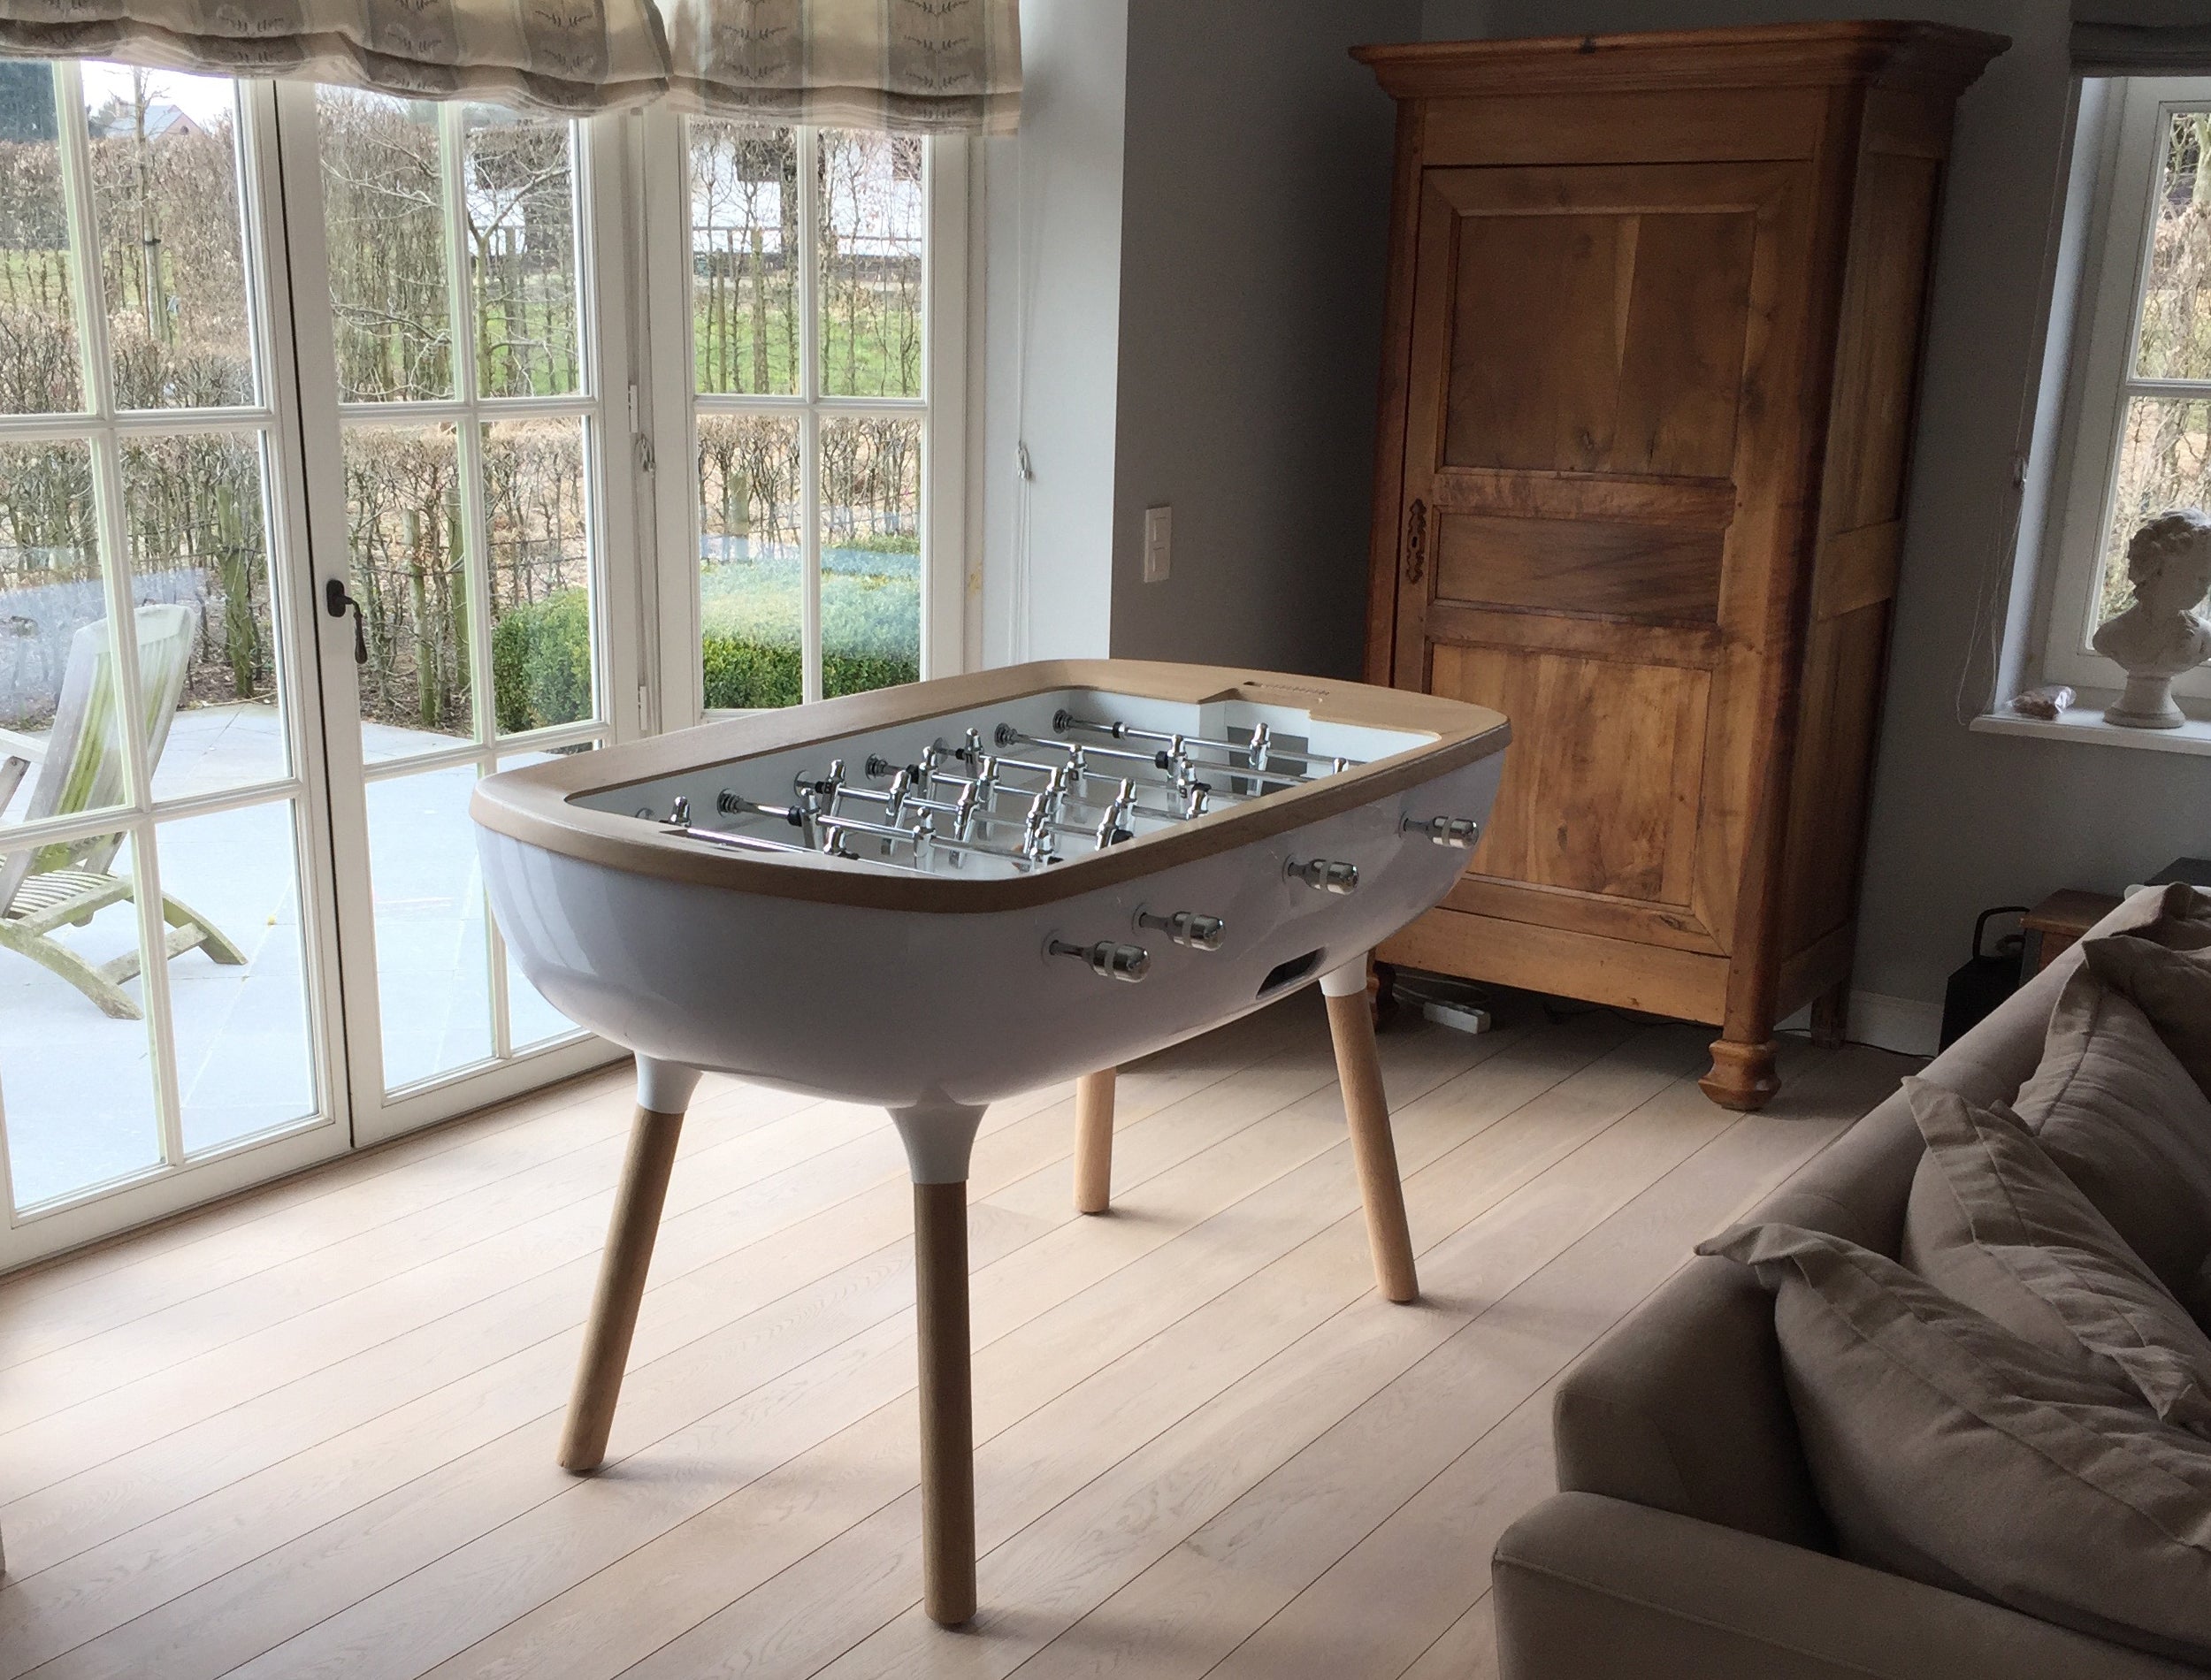 The Pure White - Design Foosball table - Debuchy by TOULET - Debuchy by Toulet - luxebackyard